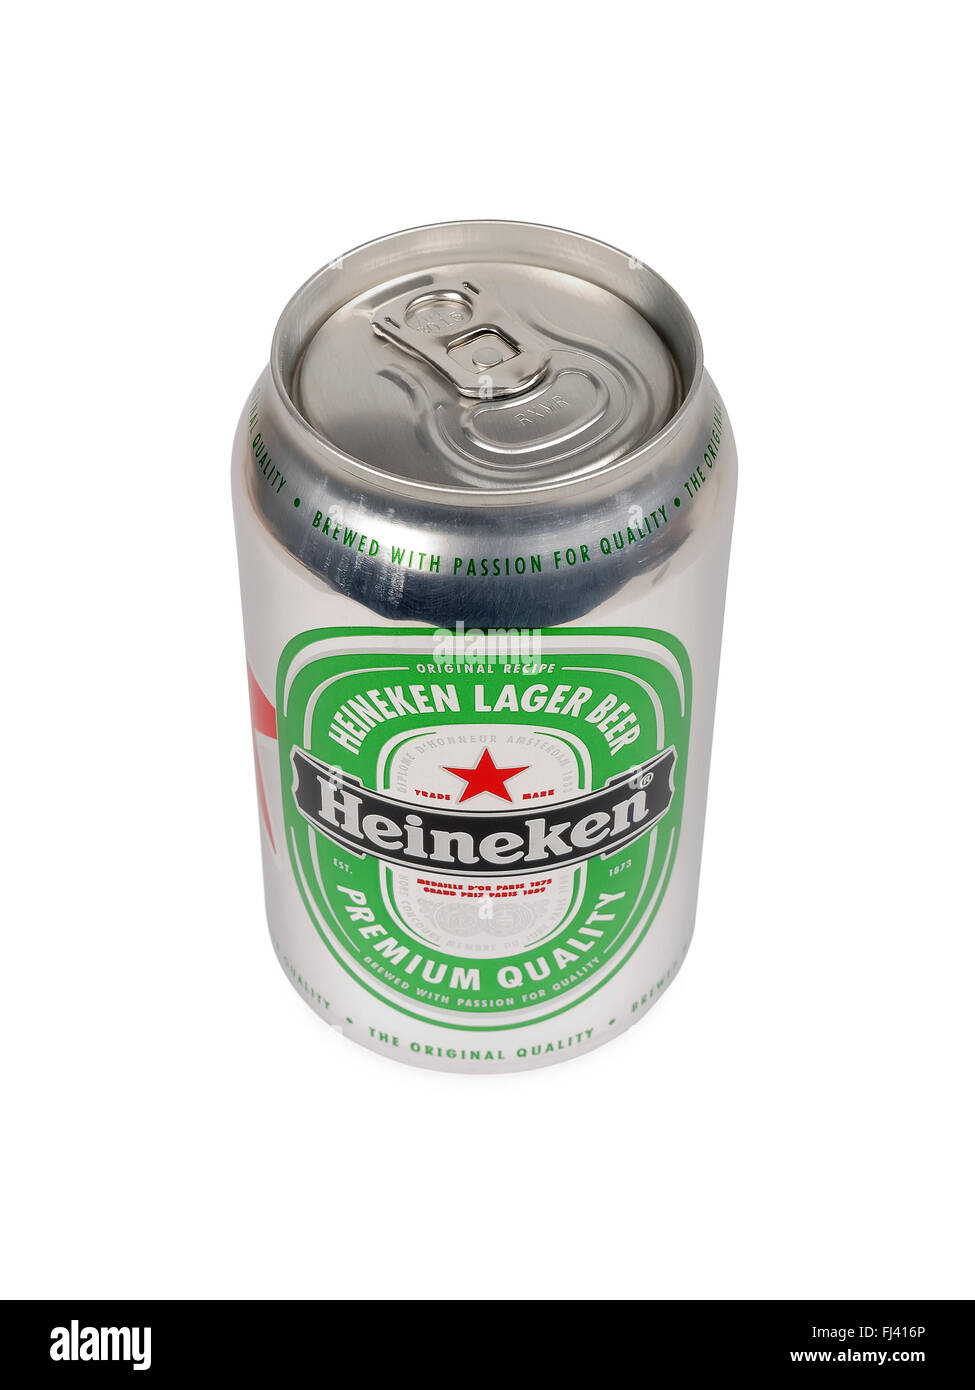 Heineken Beer on white background with clipping path. Stock Photo